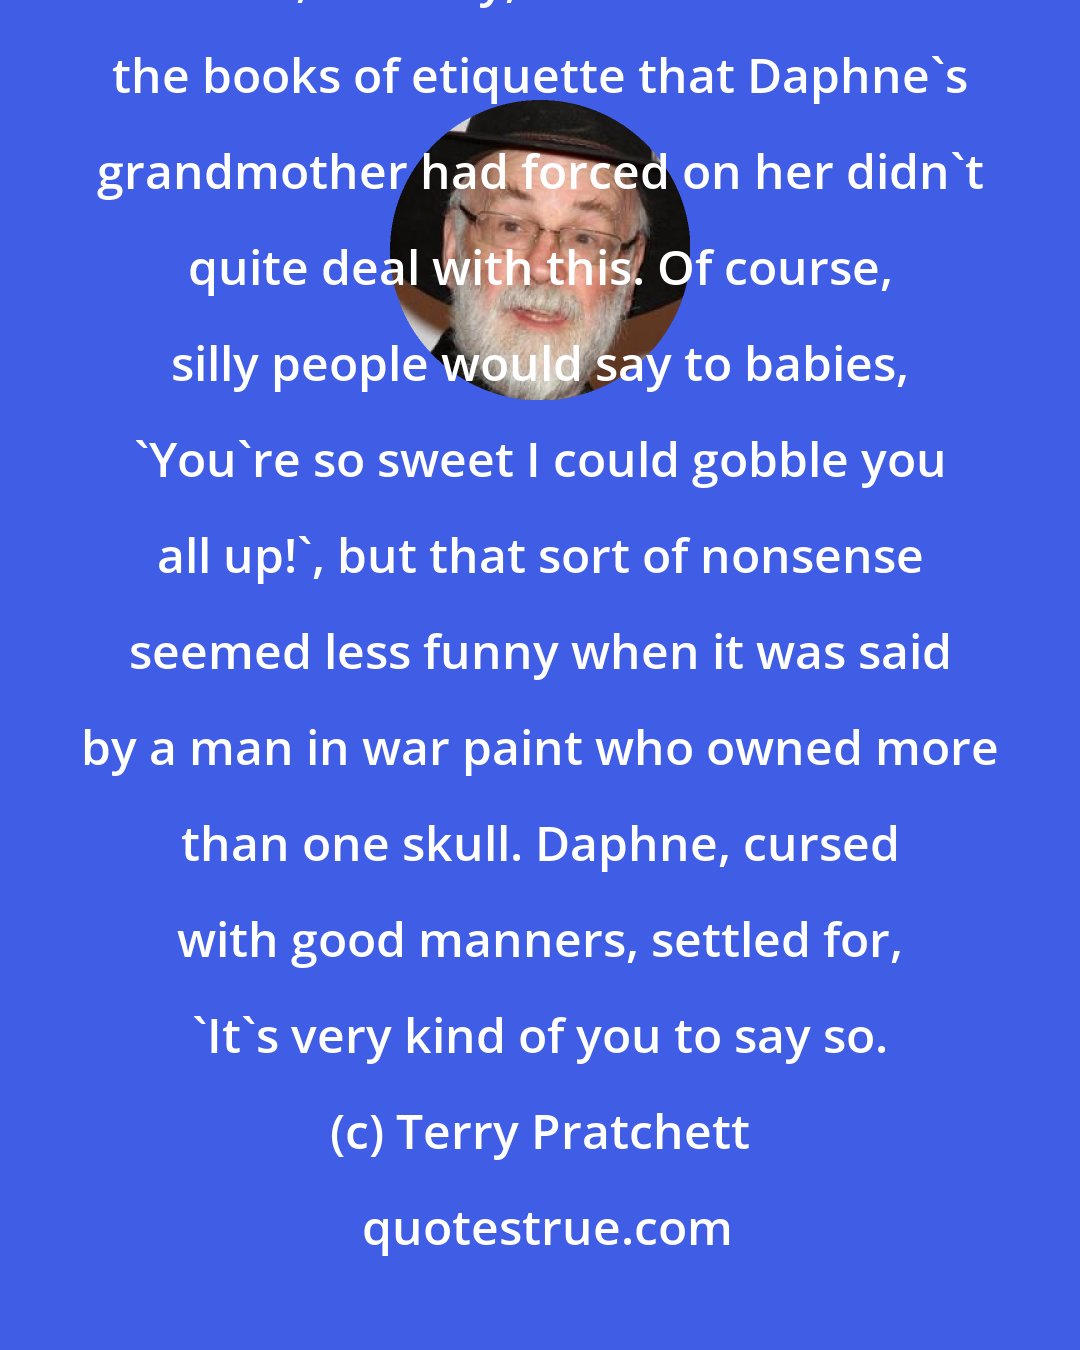 Terry Pratchett: You are very clever,' said the old man shyly. 'I would like to eat your brains, one day,' For some reason the books of etiquette that Daphne's grandmother had forced on her didn't quite deal with this. Of course, silly people would say to babies, 'You're so sweet I could gobble you all up!', but that sort of nonsense seemed less funny when it was said by a man in war paint who owned more than one skull. Daphne, cursed with good manners, settled for, 'It's very kind of you to say so.